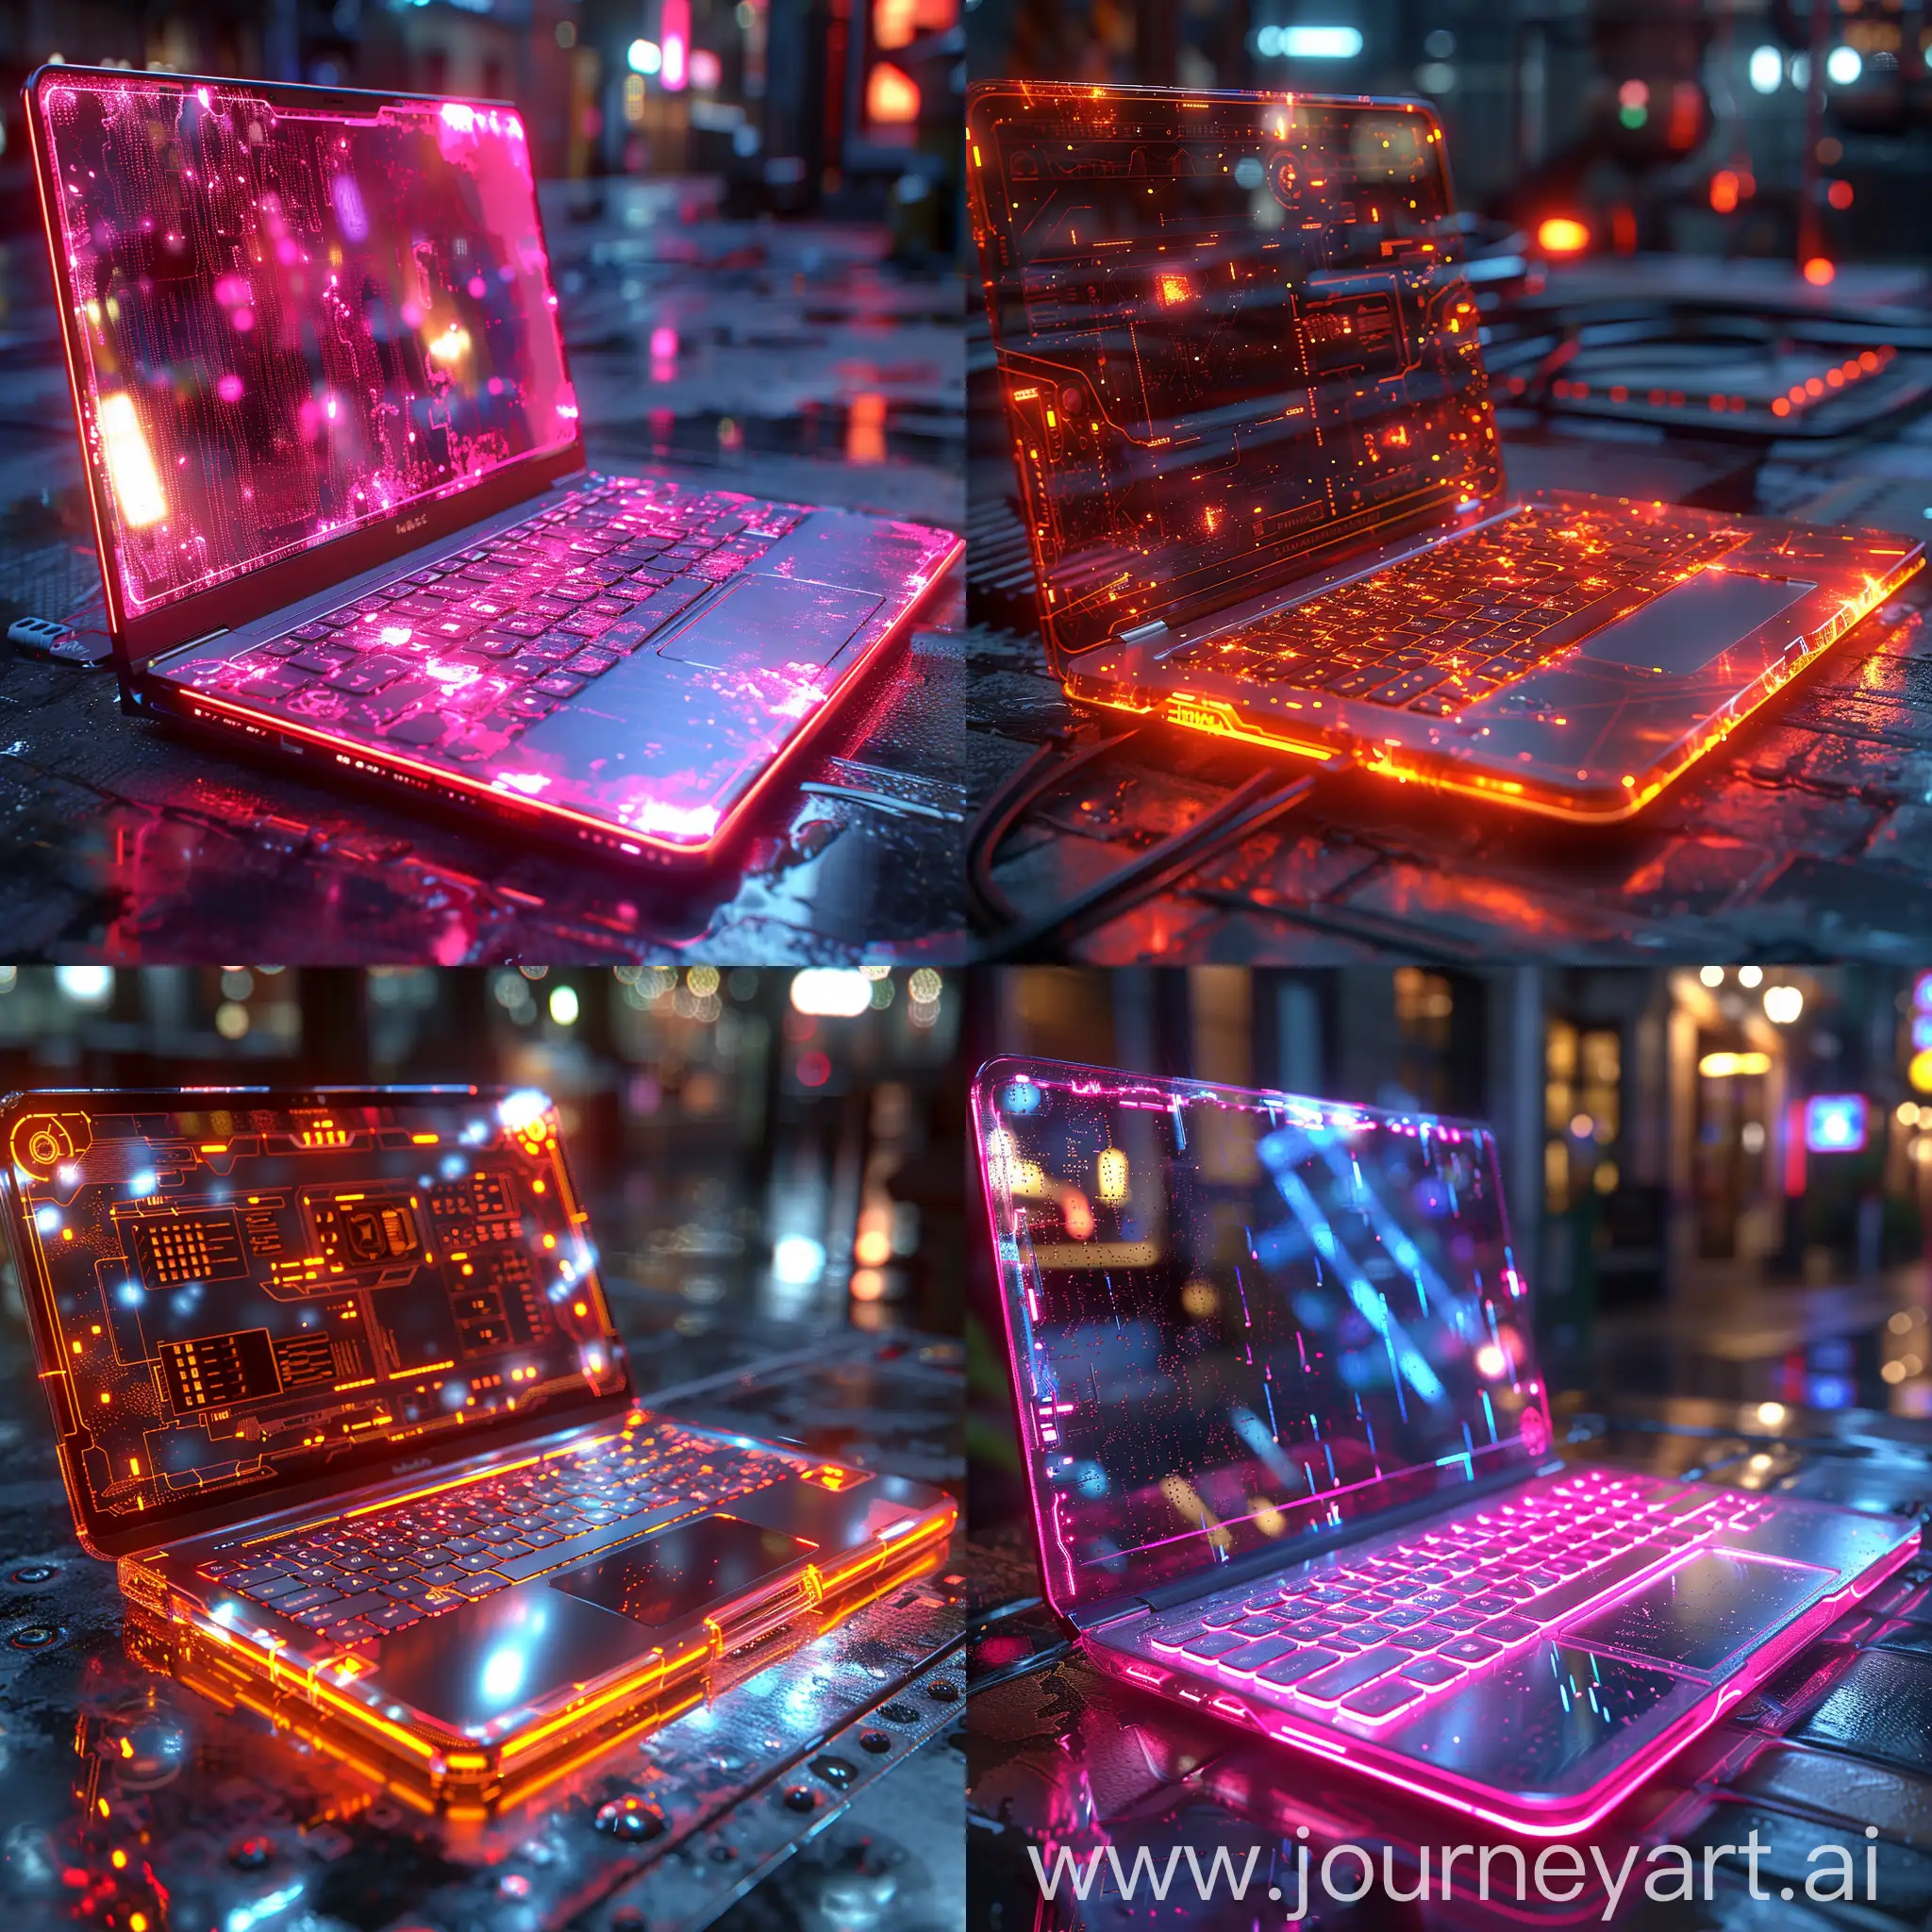 Futuristic-UltraThin-Laptop-with-Glowing-Holographic-Keyboard-in-HighTech-Environment